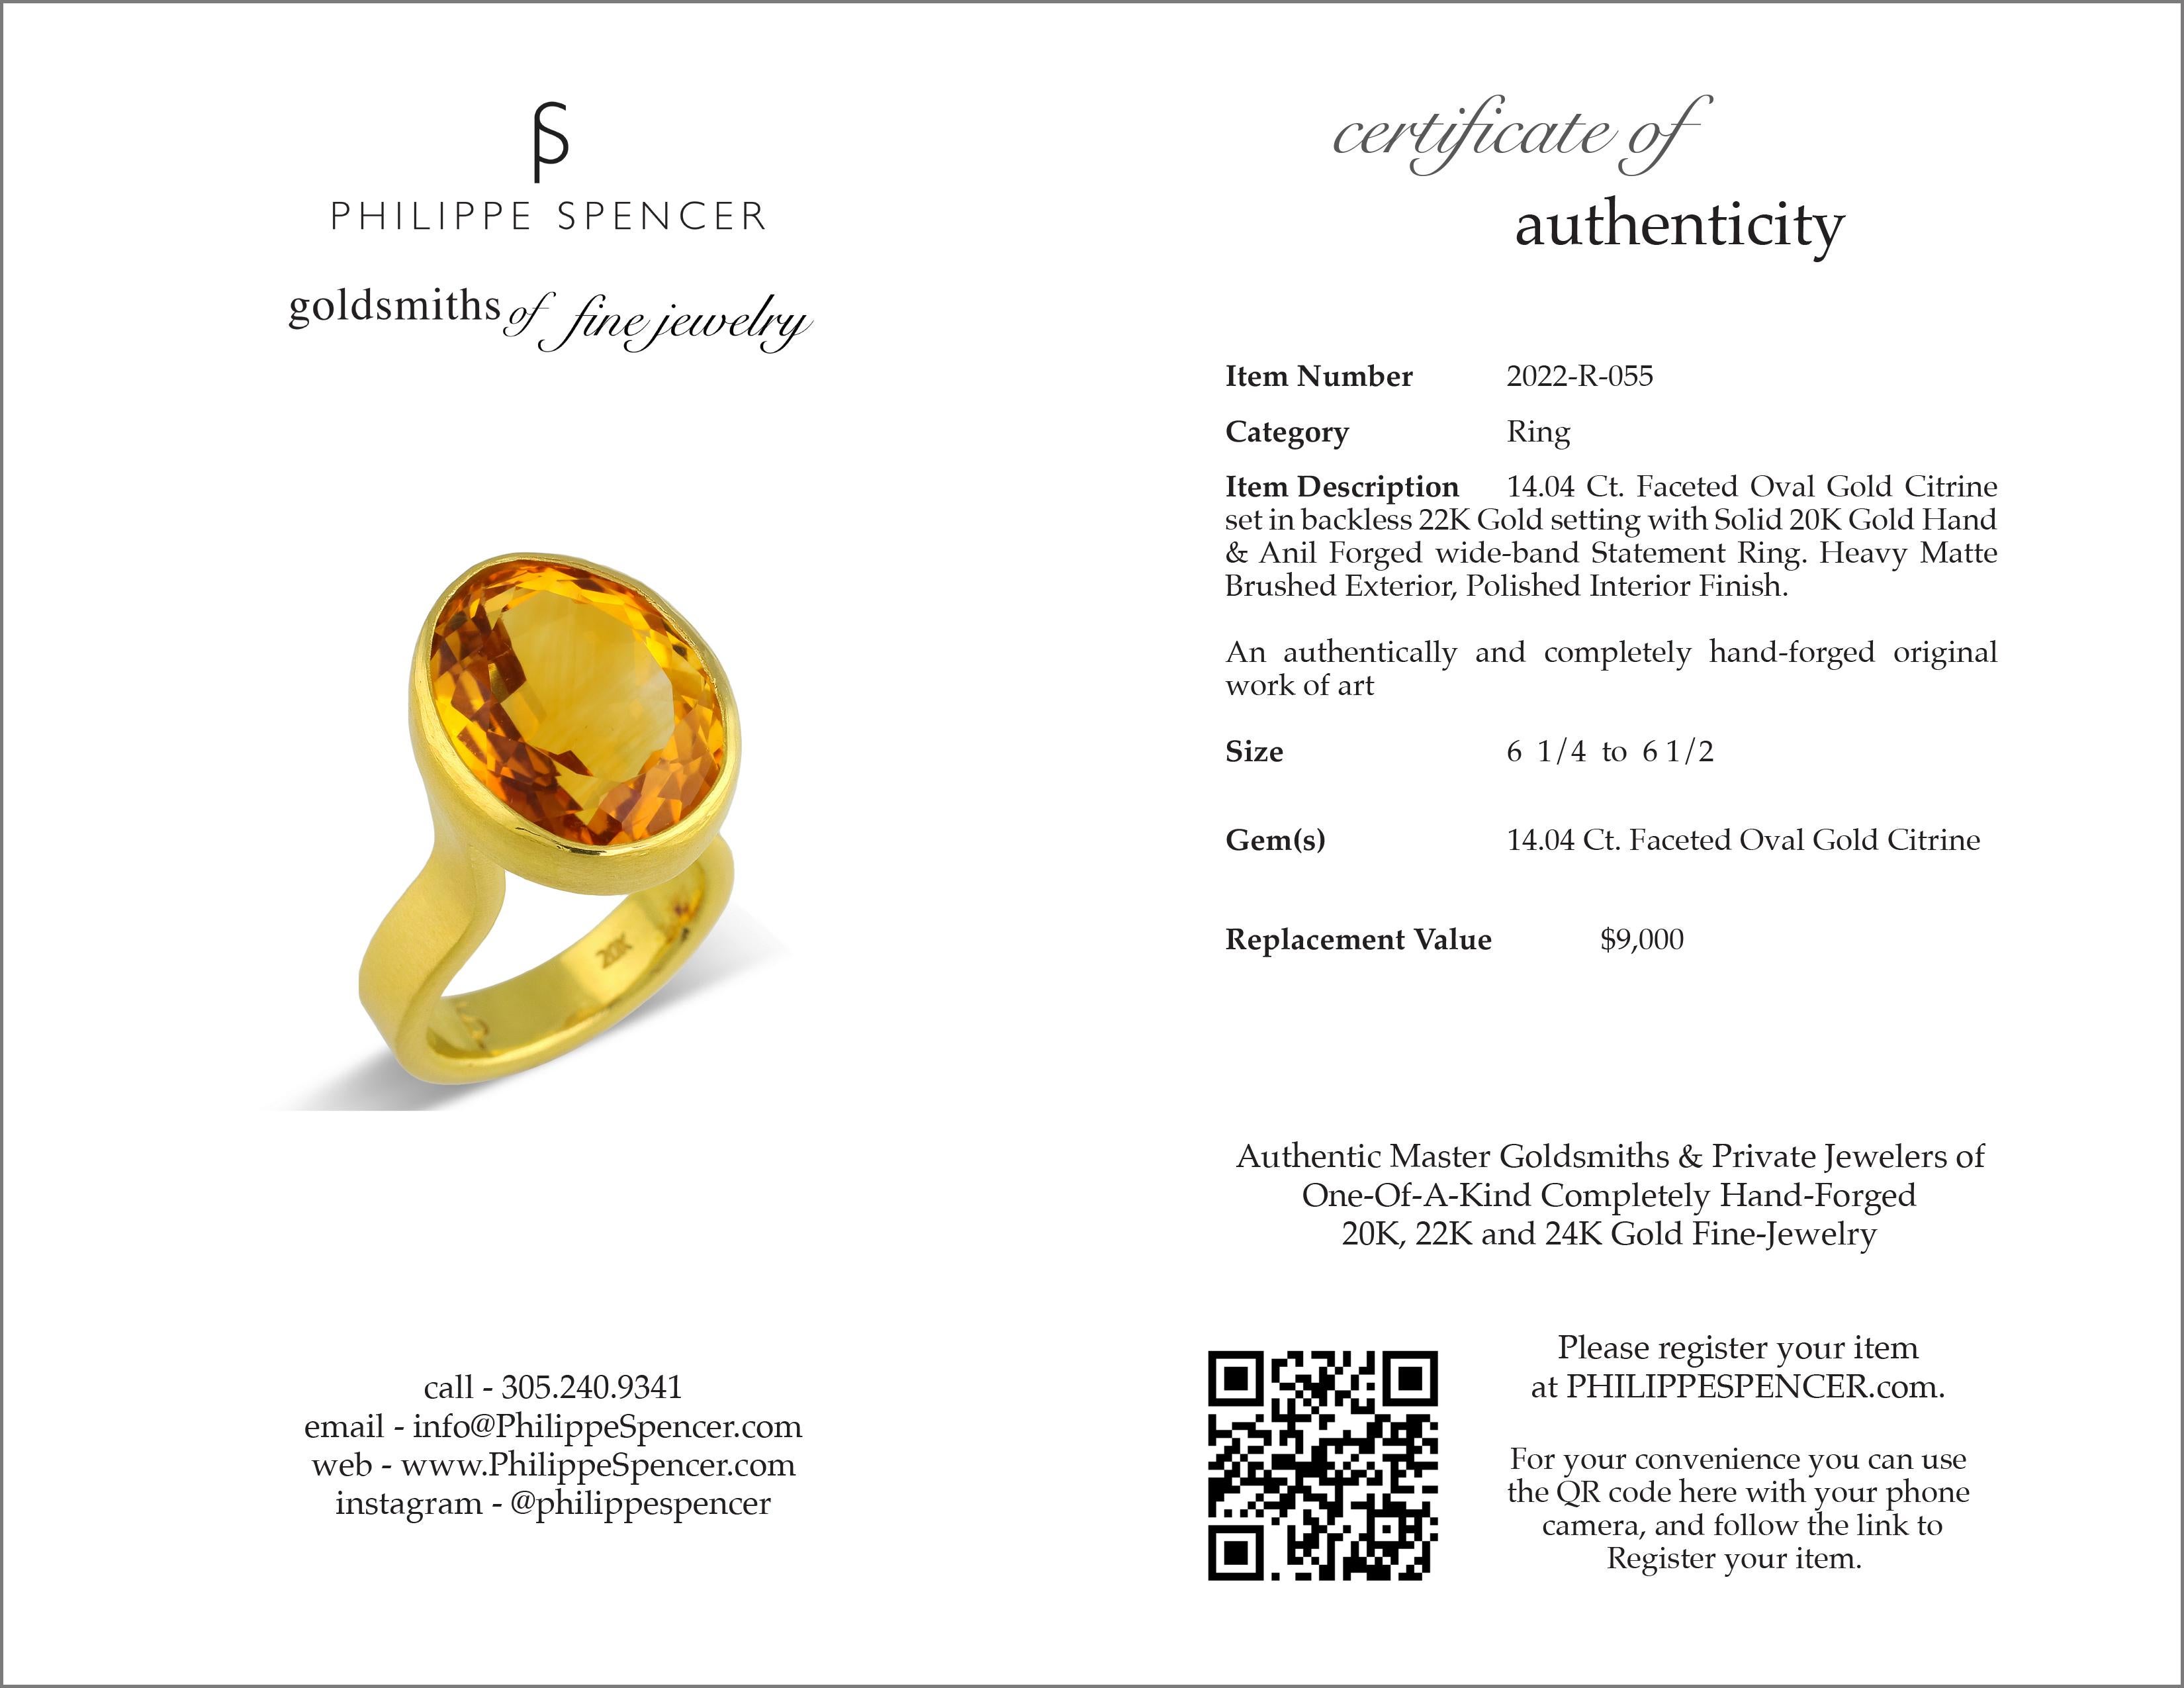 Oval Cut PHILIPPE SPENCER 14.04 Ct. Gold Citrine in 22K and 20K Gold Statement Ring